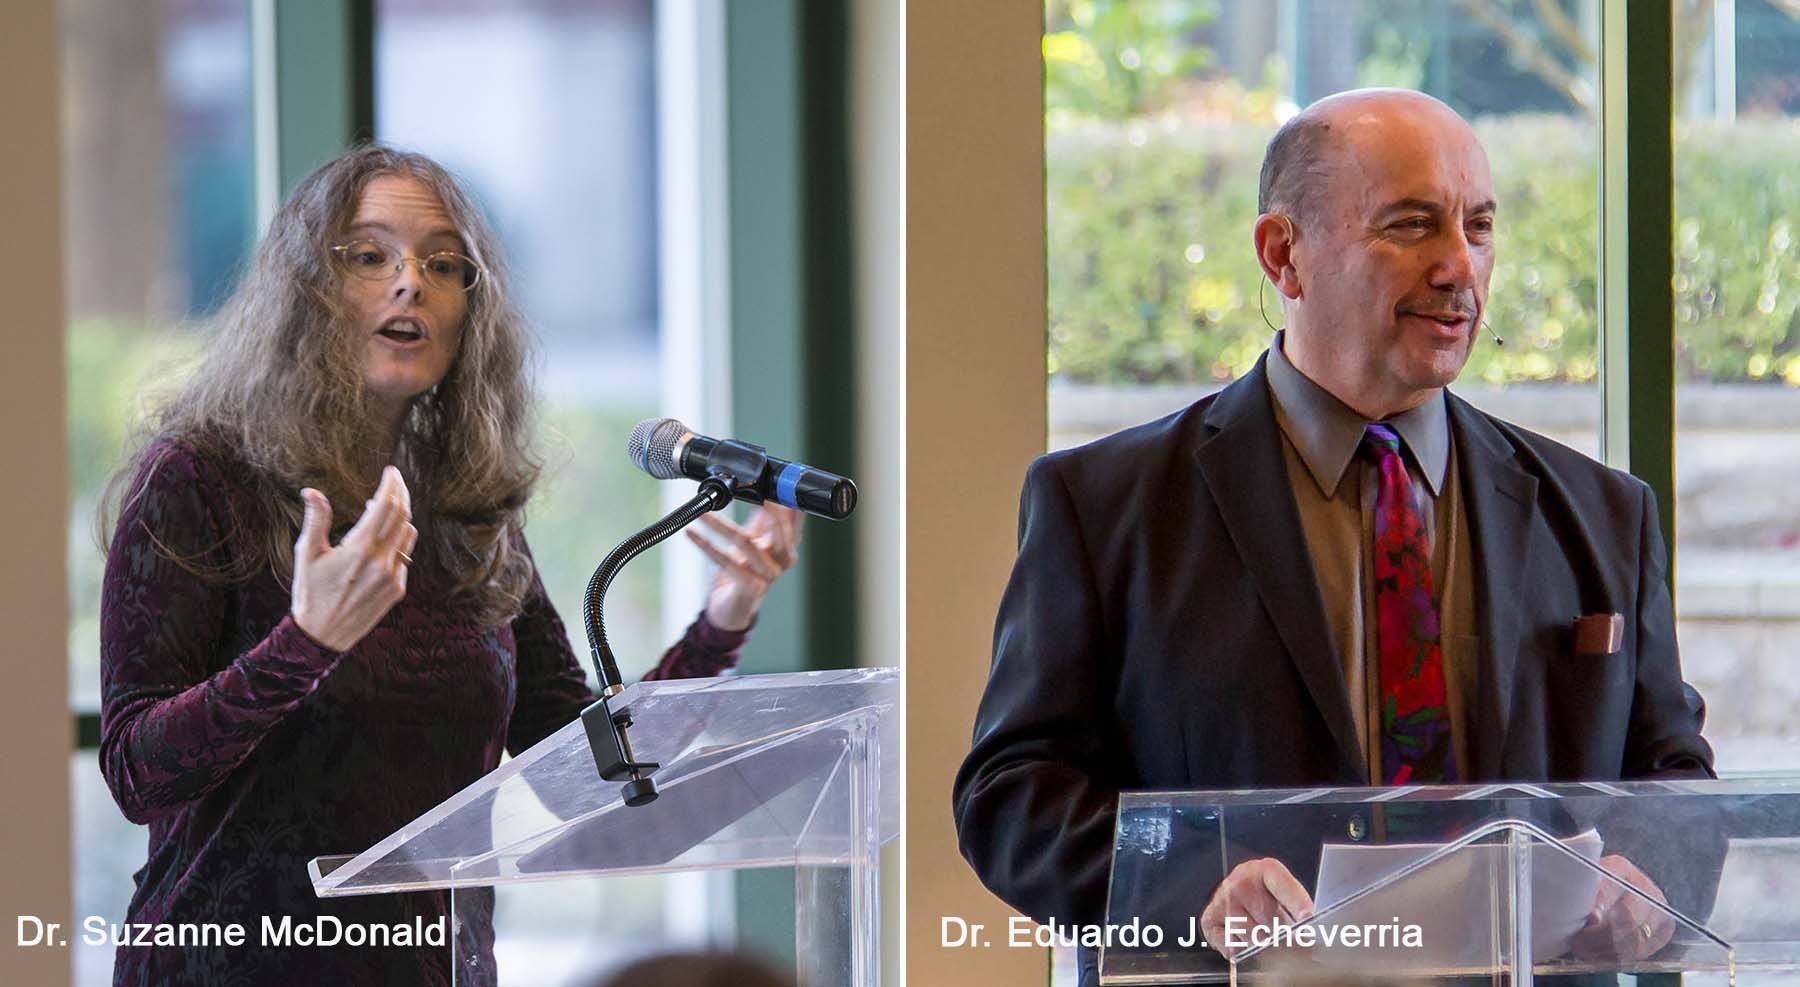 As part of Trinity’s WorldView series, the College was pleased to recently host two speakers who discussed the impact of the Reformation on both Reformed Protestantism and Roman Catholic viewpoints: Dr. Suzanne McDonald and Dr. Eduardo J. Echeverria ’73